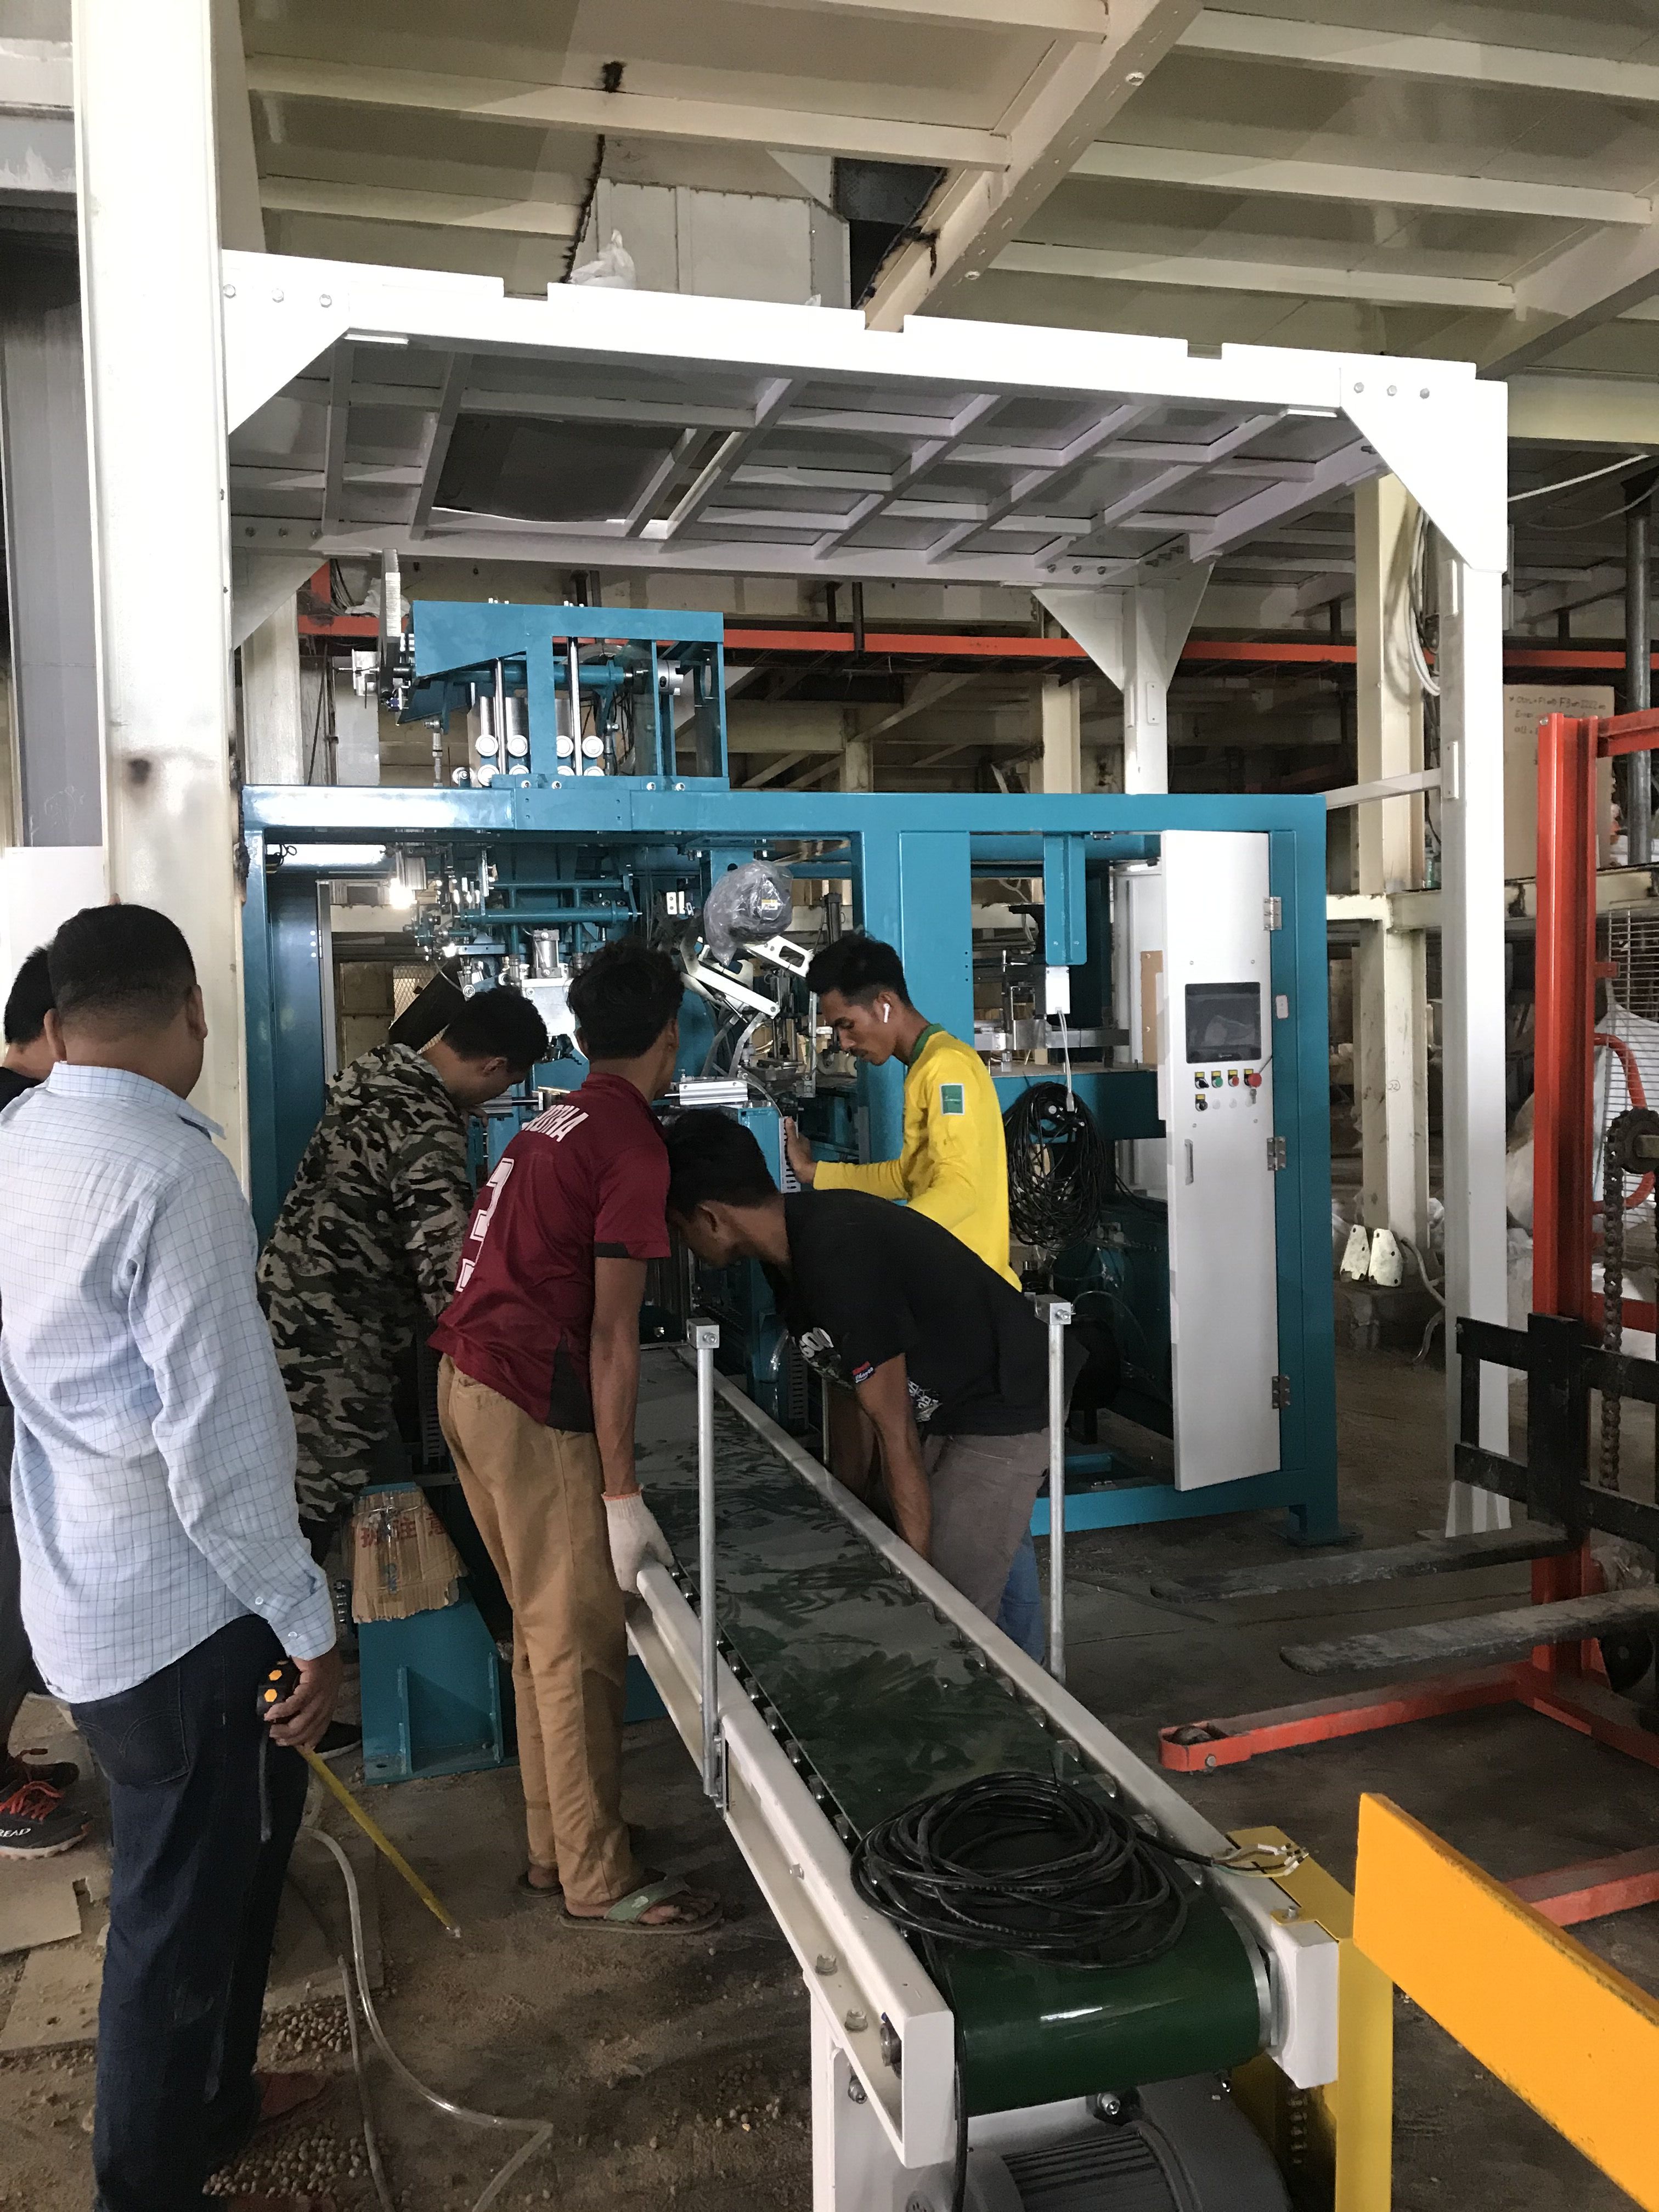 packing machine Single Super Phosphate Plant bagging machine fully Automatic Packing Palletizing Line, Fully Automatic Packing Line, Fully Automatic Bagging Line, Fully Automatic filling and packaging